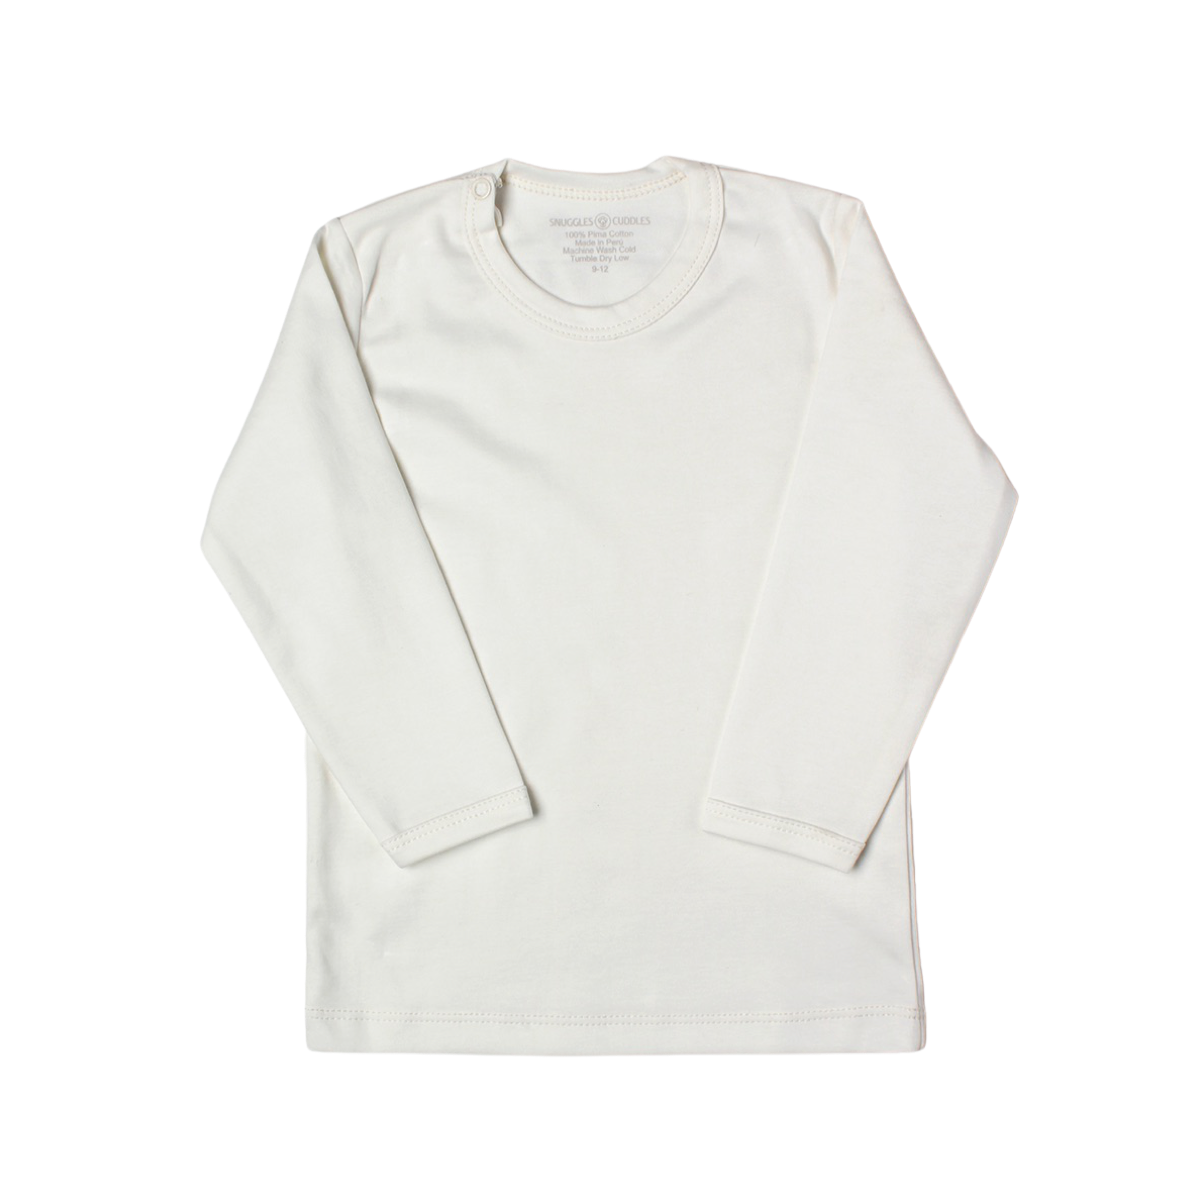 Ivory- Classic Long Sleeve Shirt in Pima Cotton